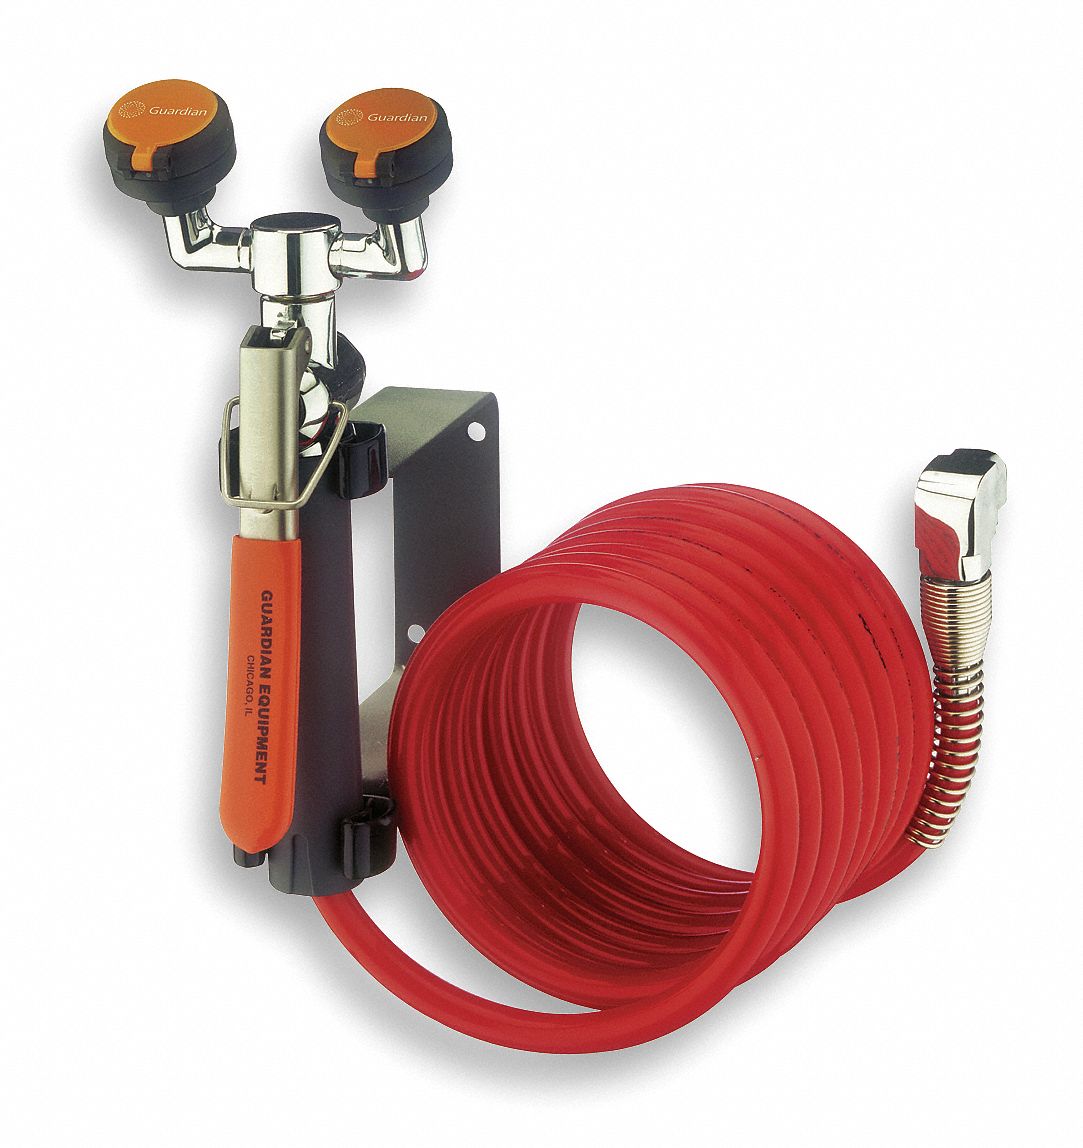 2LVK7 - Dual Head Drench Hose Wall Mount 12 ft.